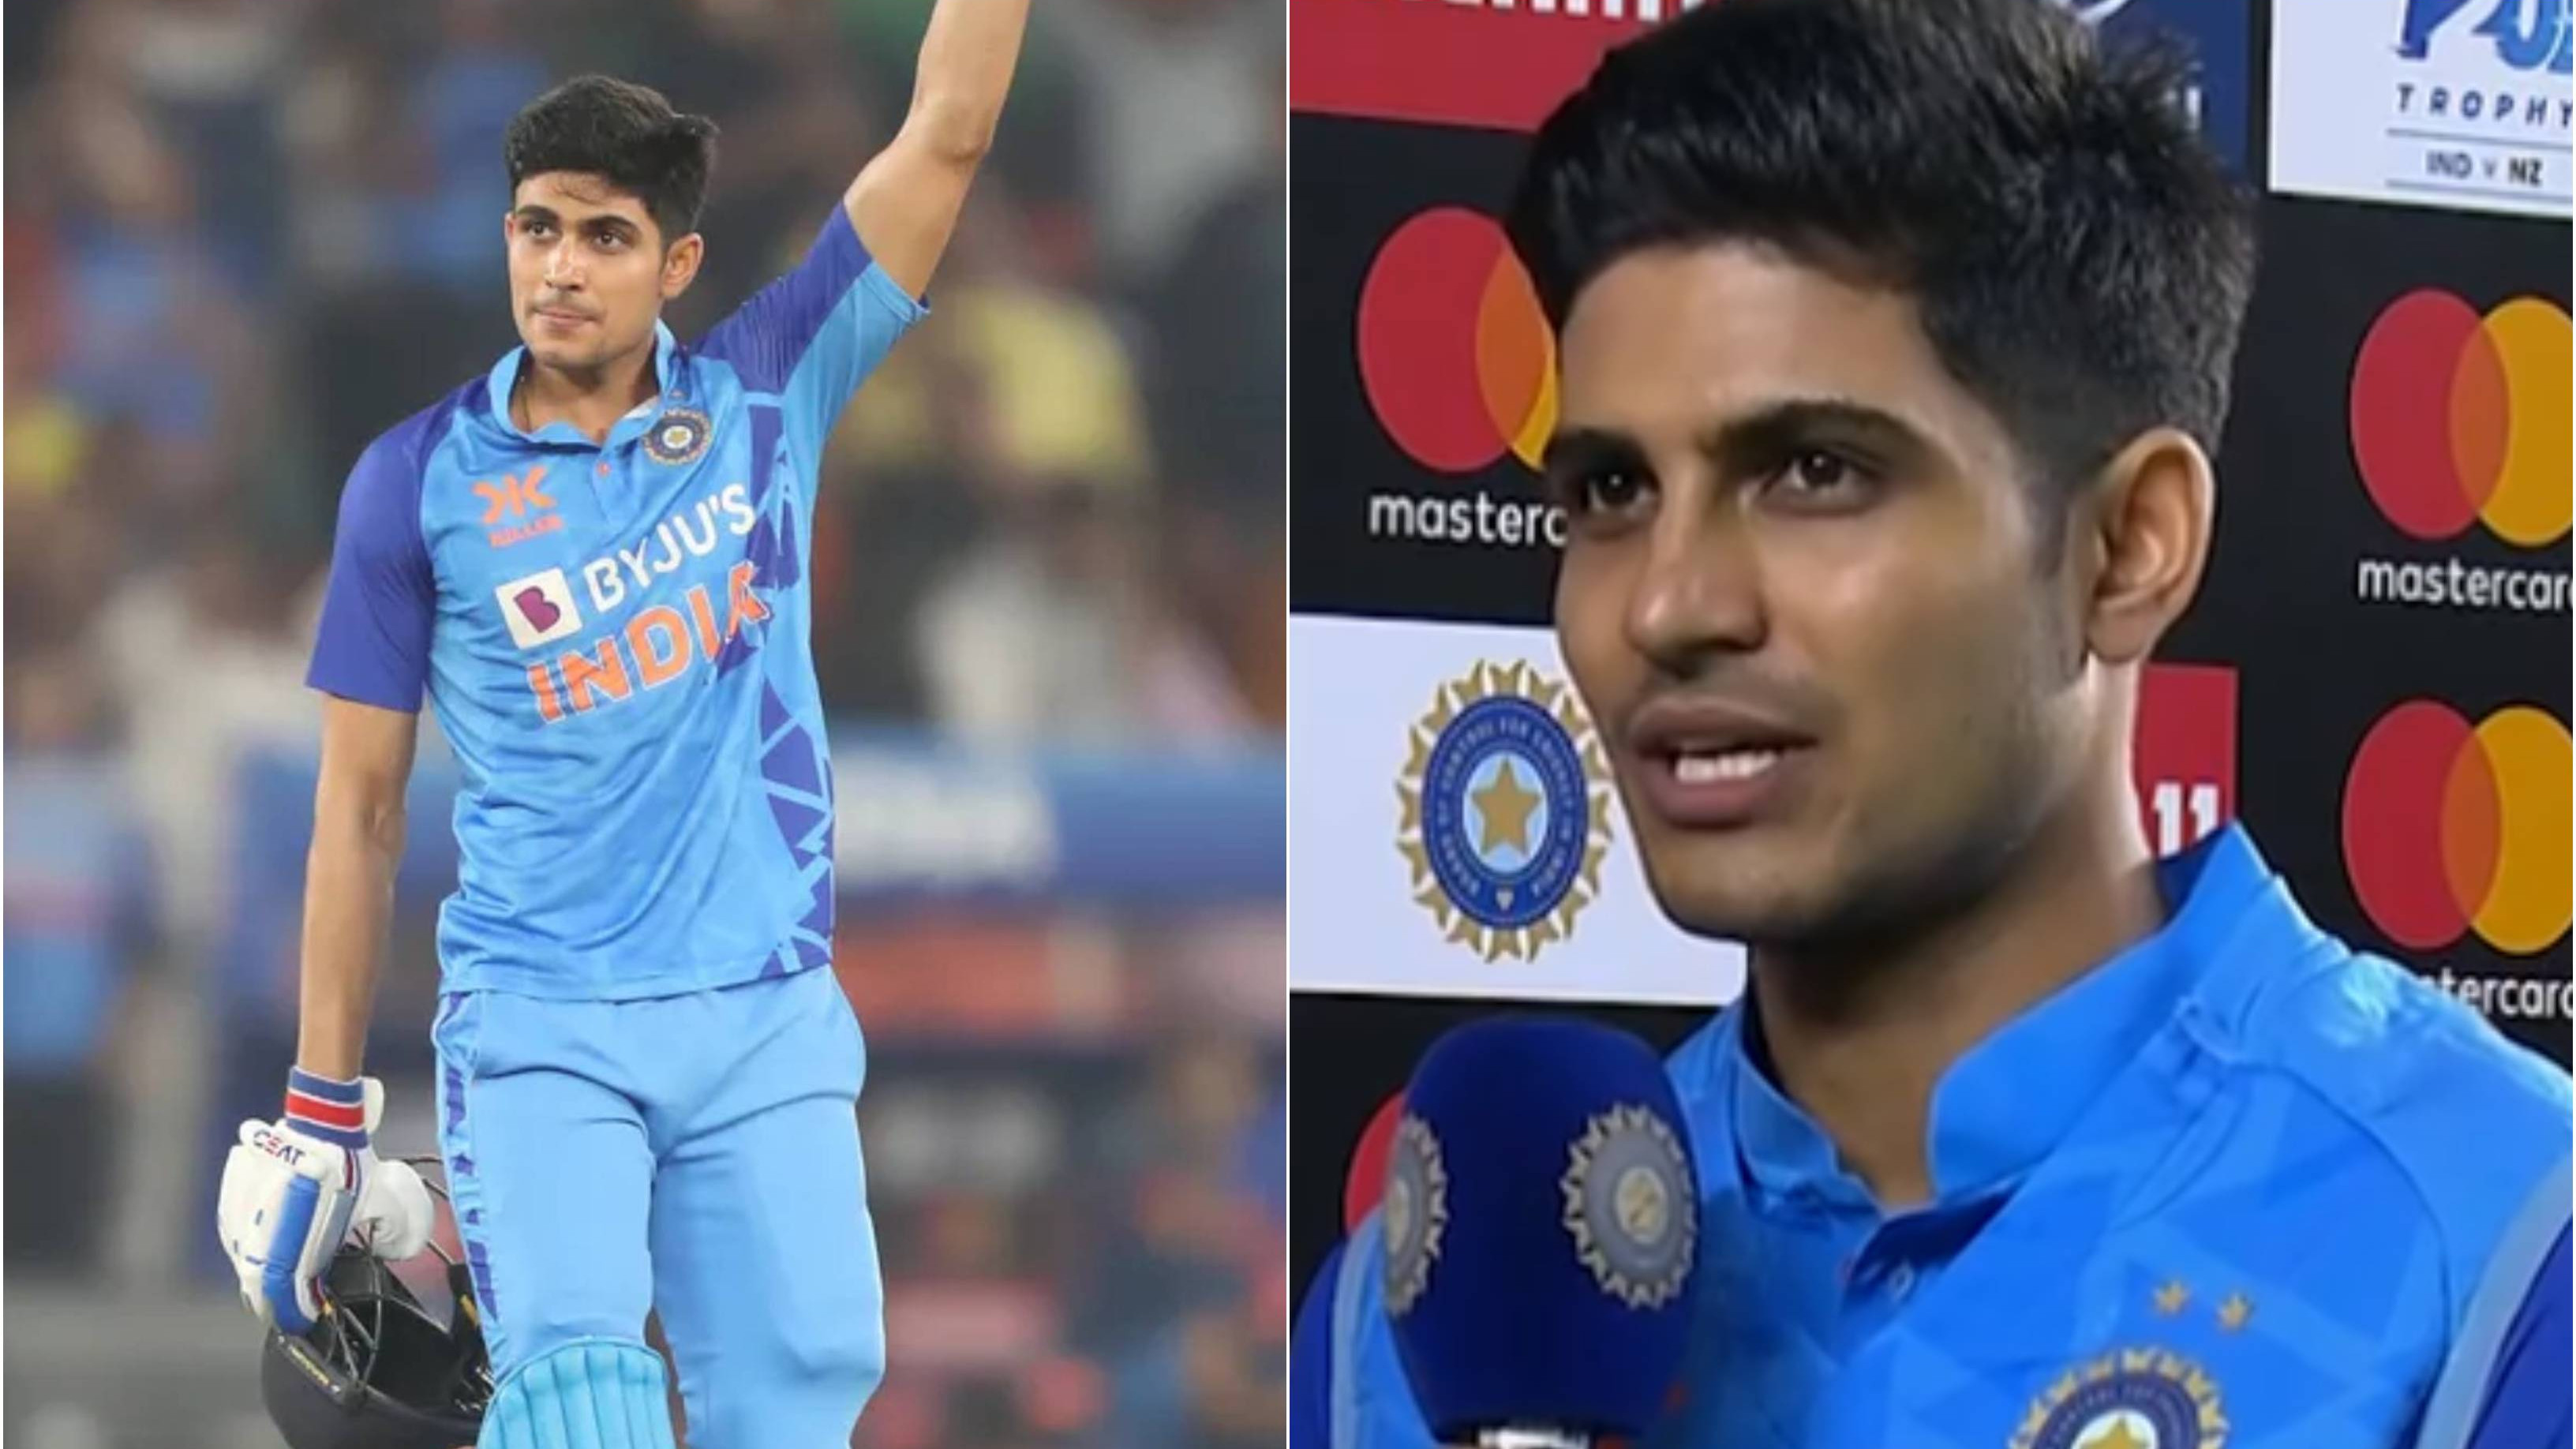 IND v NZ 2023: “There isn't any kind of fatigue,” Shubman Gill keen to play all formats for India